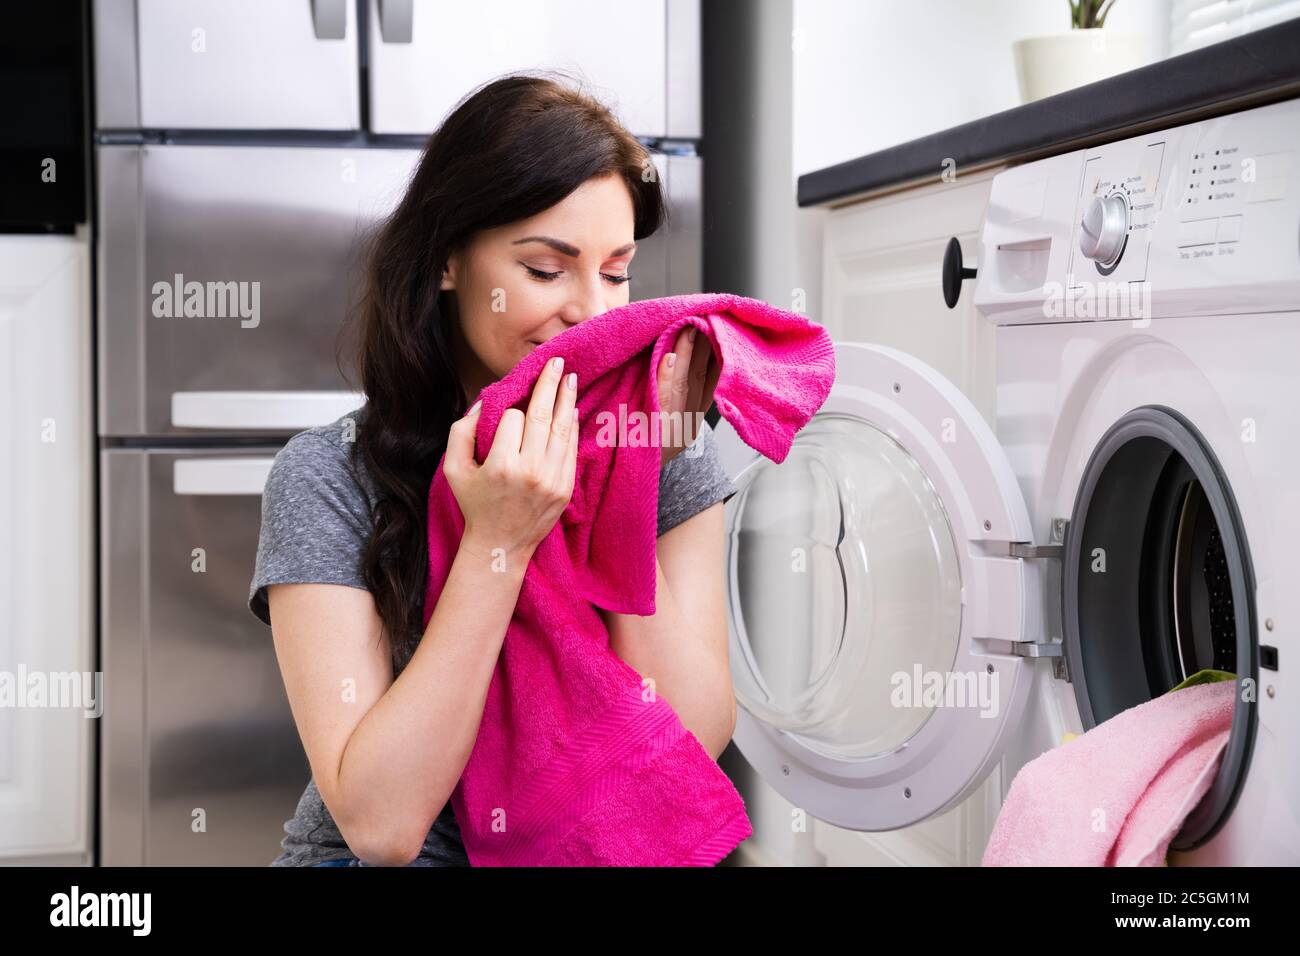 Woman Smelling Clothes At Home Doing Laundry Stock Photo